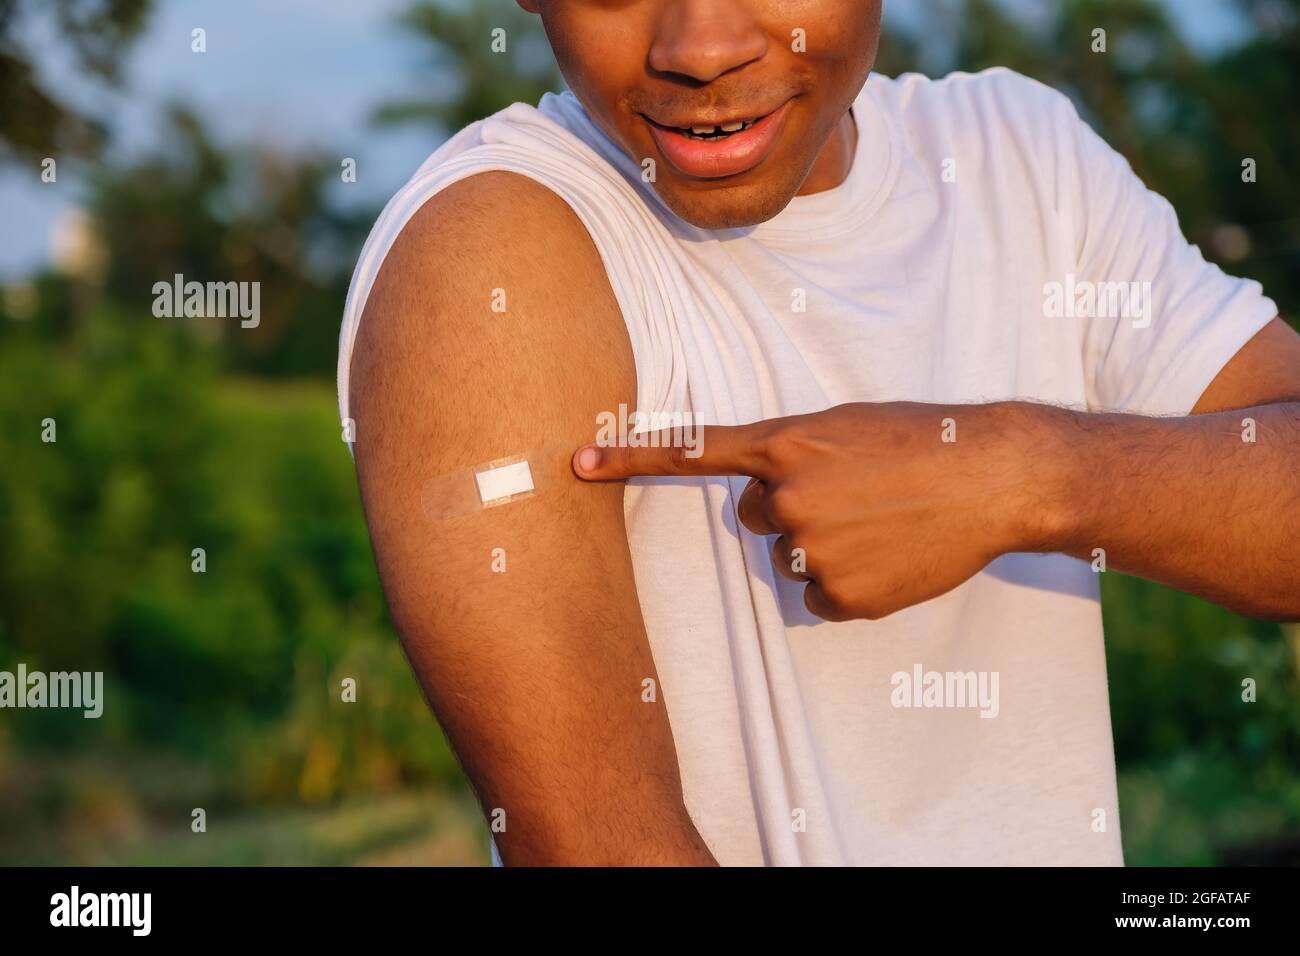 Young smiling African American man showing hand with adhesive plaster  Stock Photo